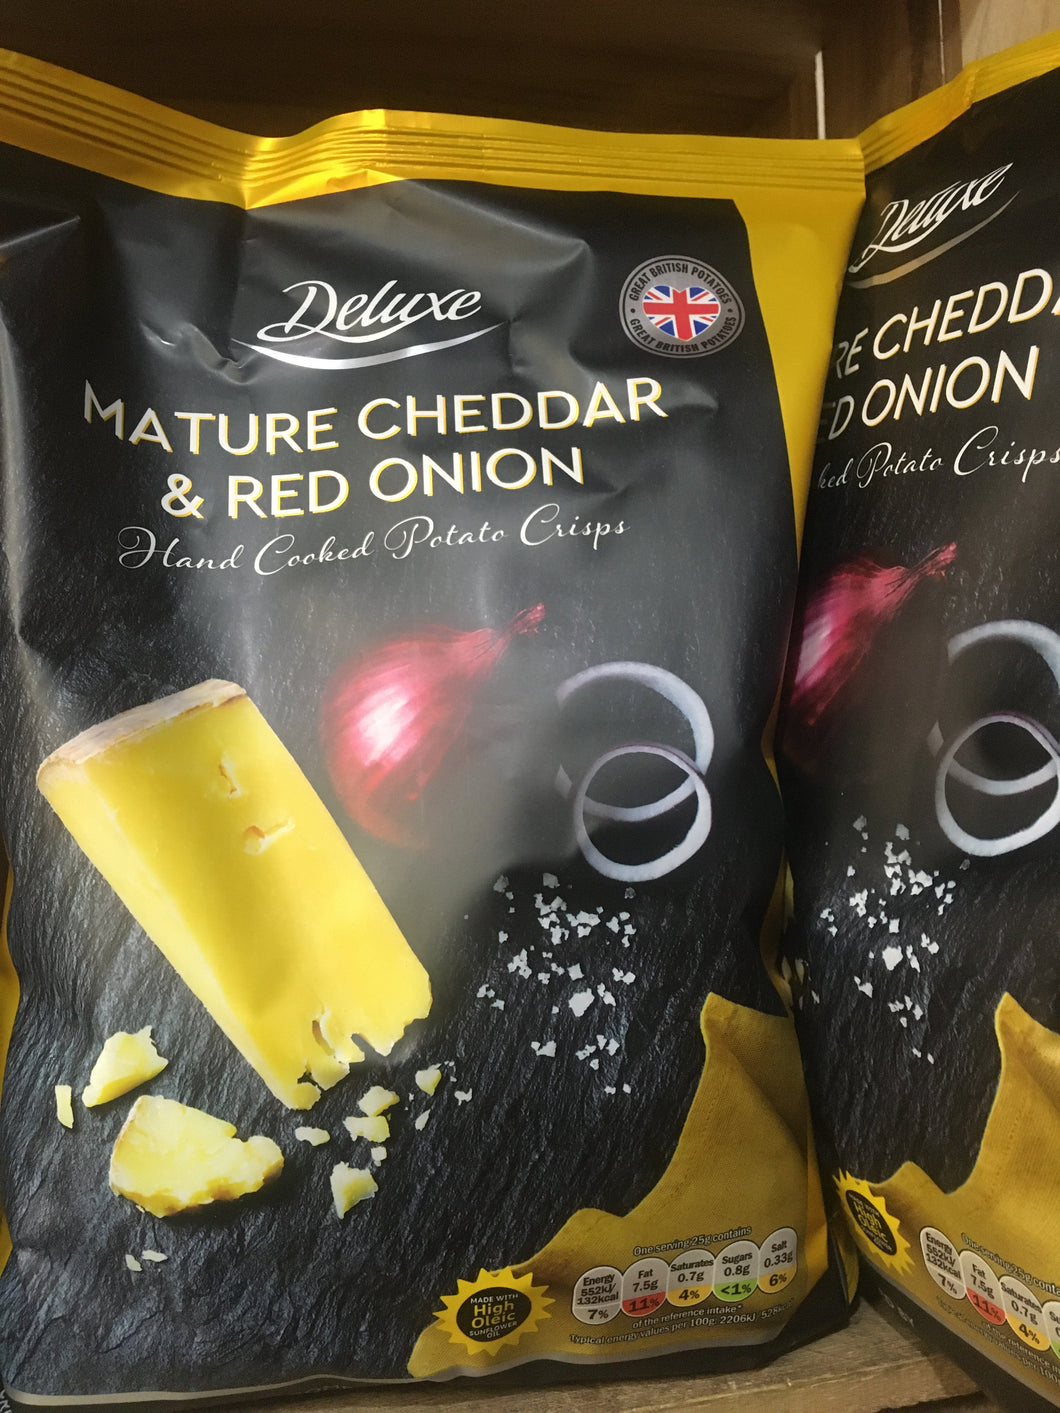 2x Deluxe Mature Cheddar & Red Onion Crisps Share Bags (2 Packs x150g)